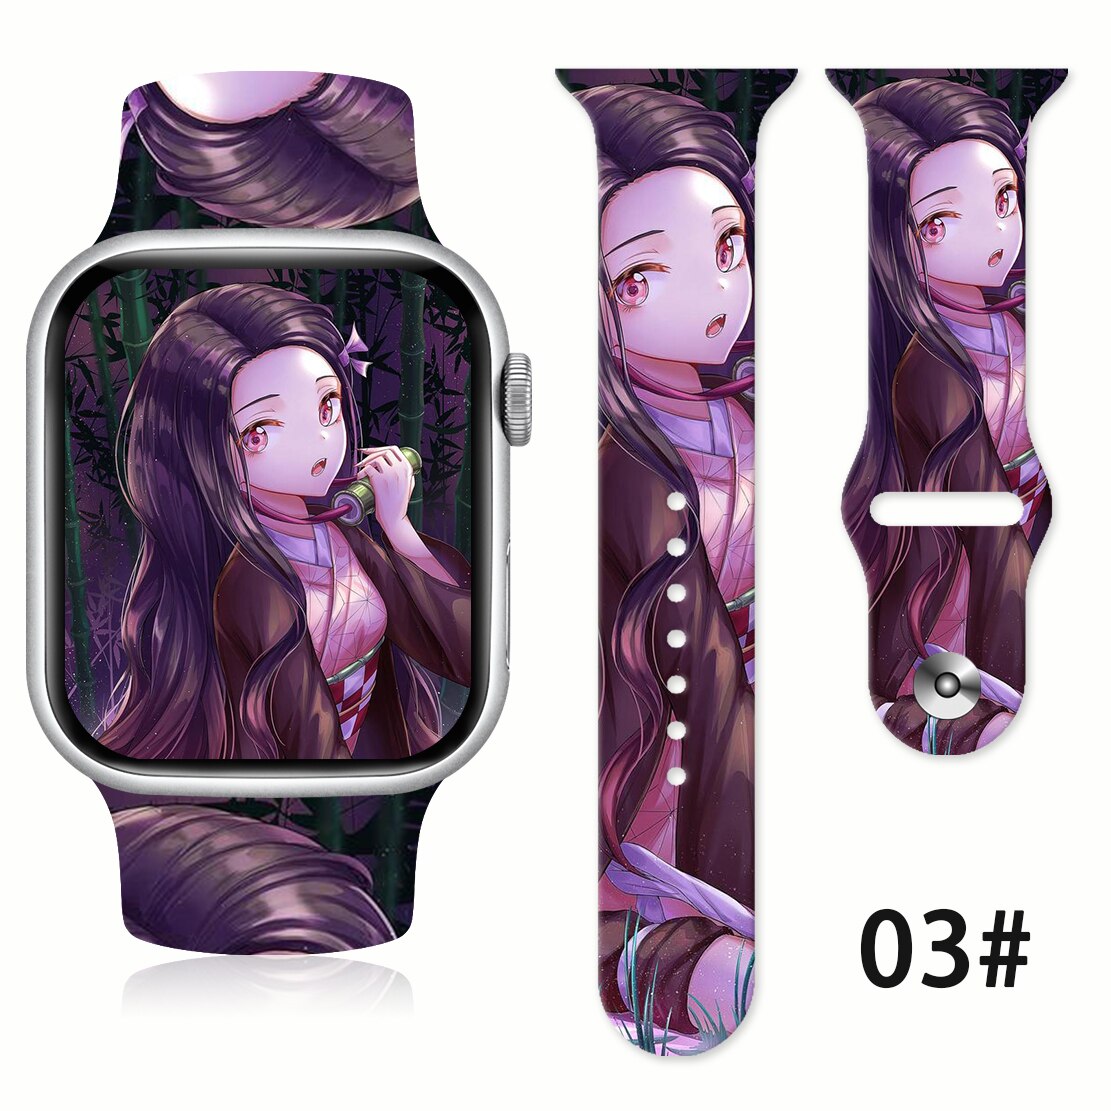 Demon Slayer Strap Band for Apple Watch